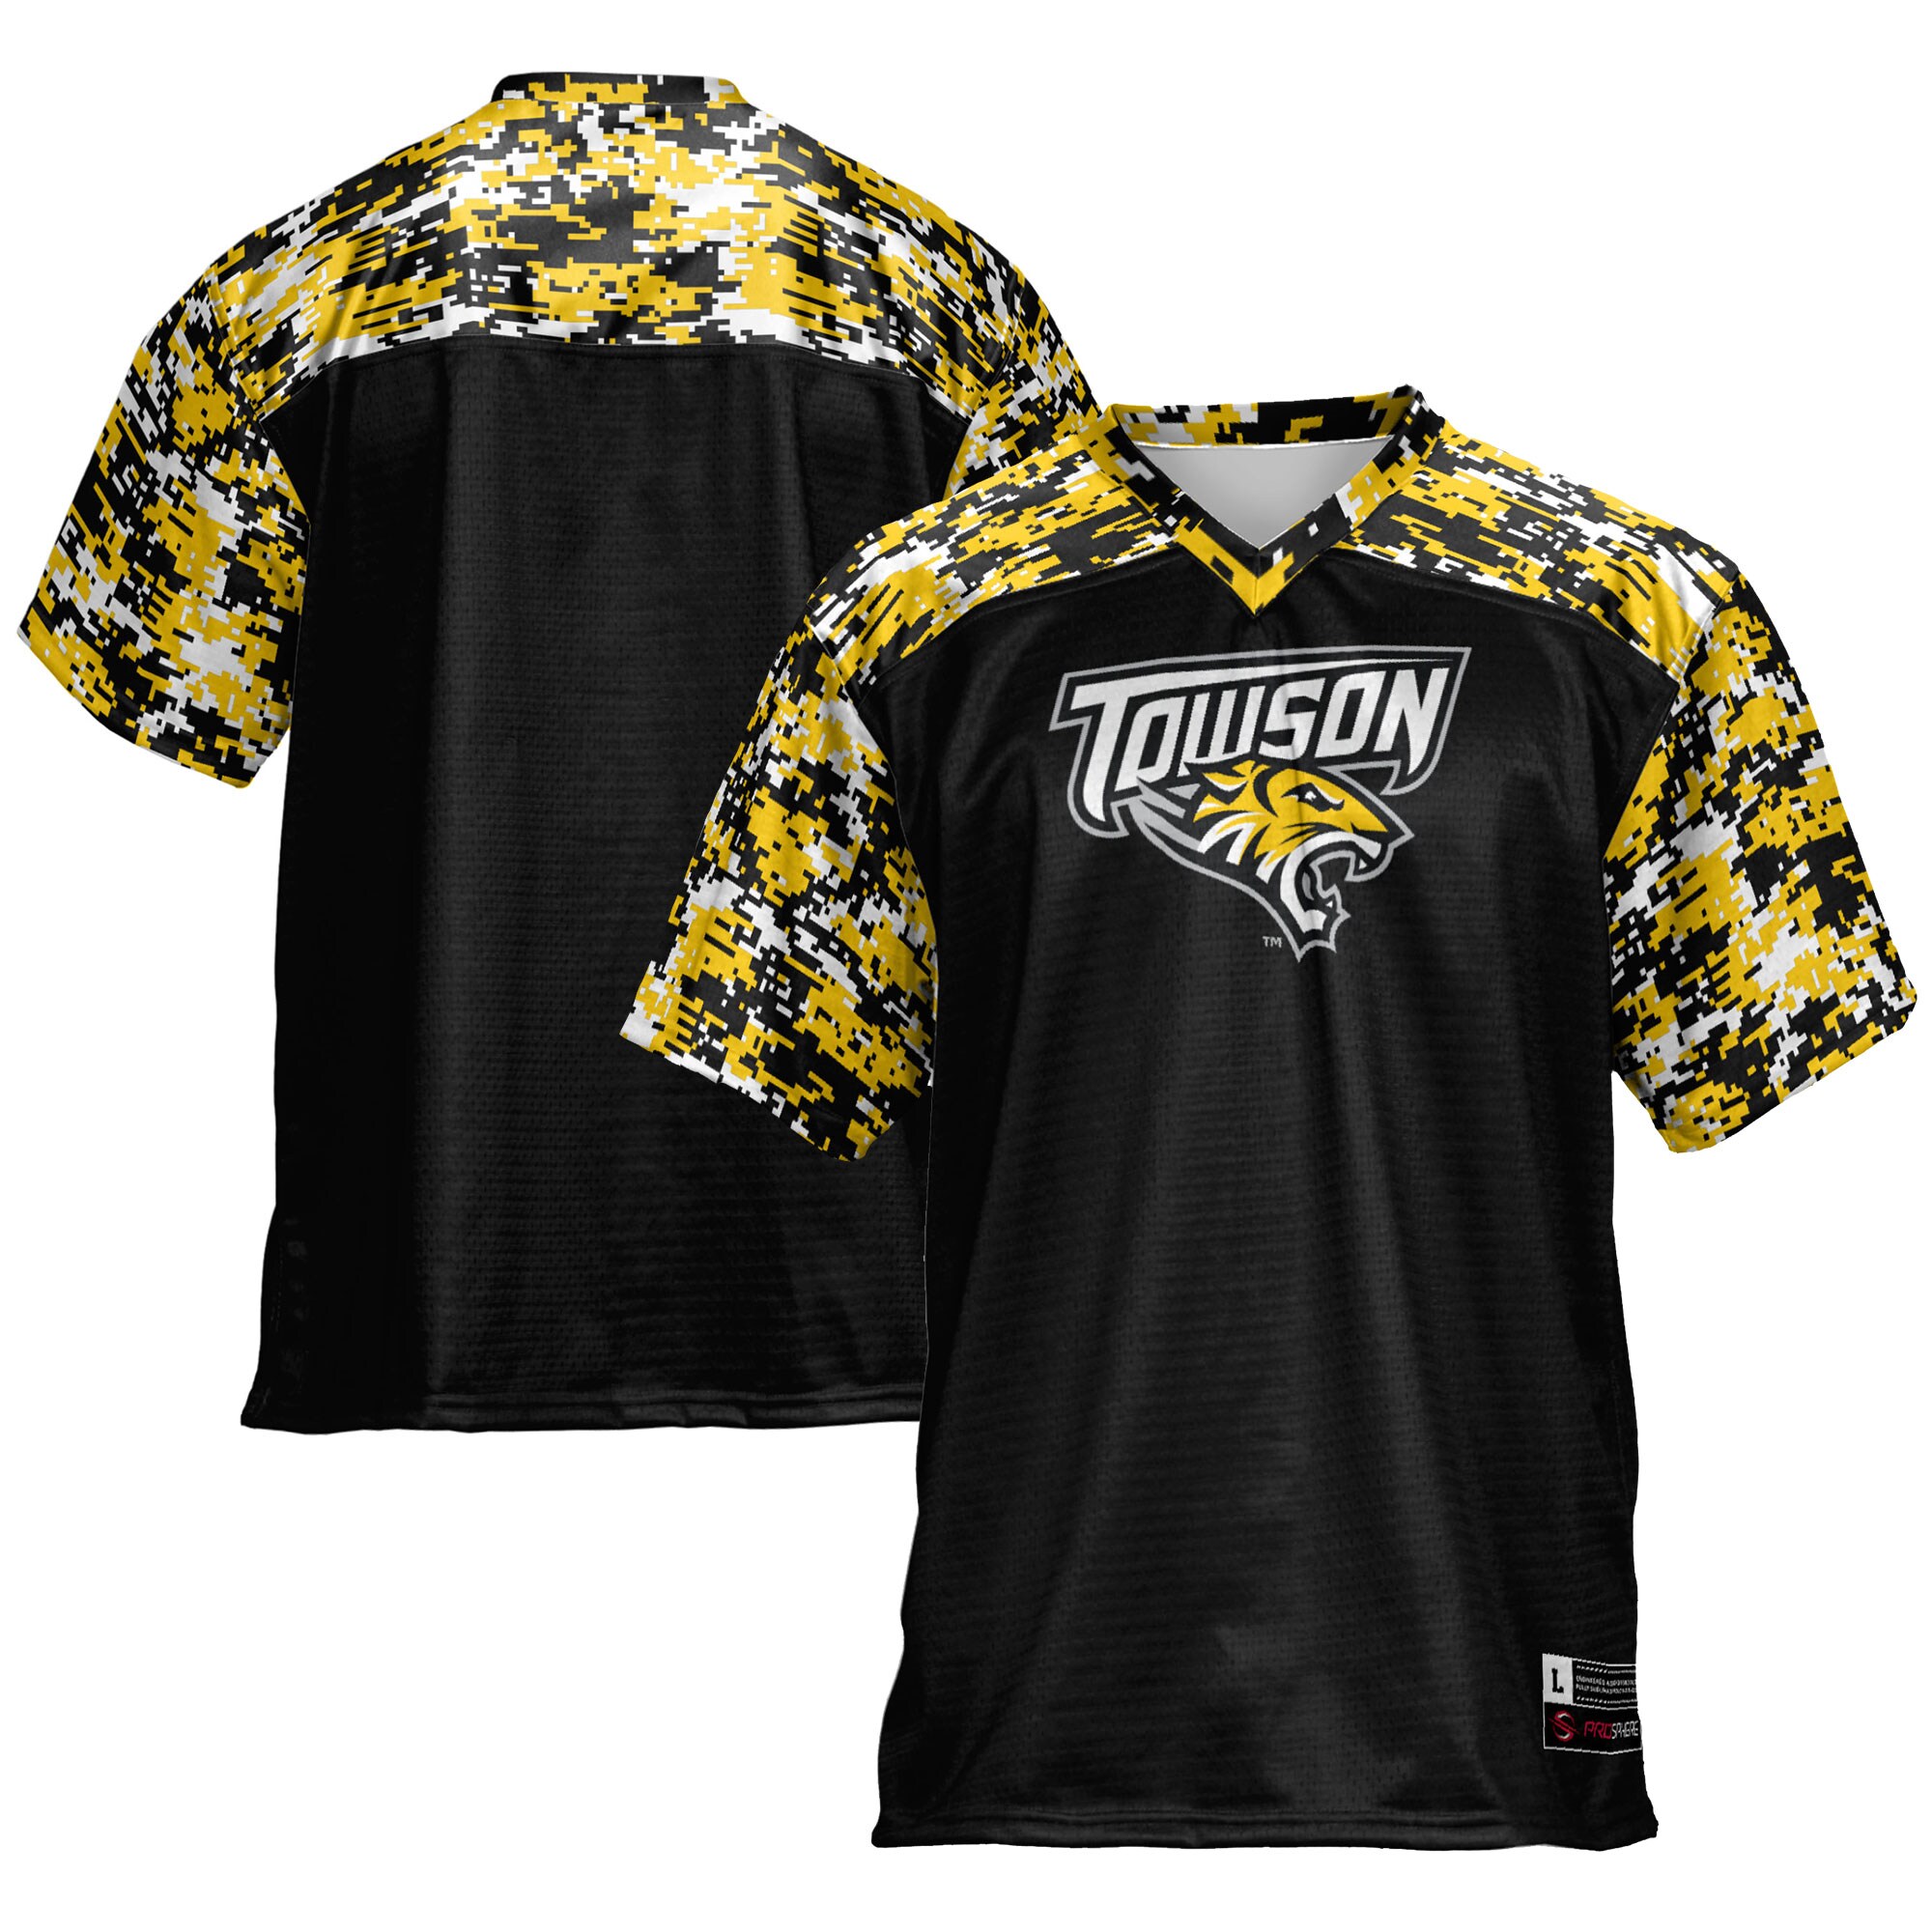 Towson Tigers  Football Shirts Jersey - Black For Youth Women Men